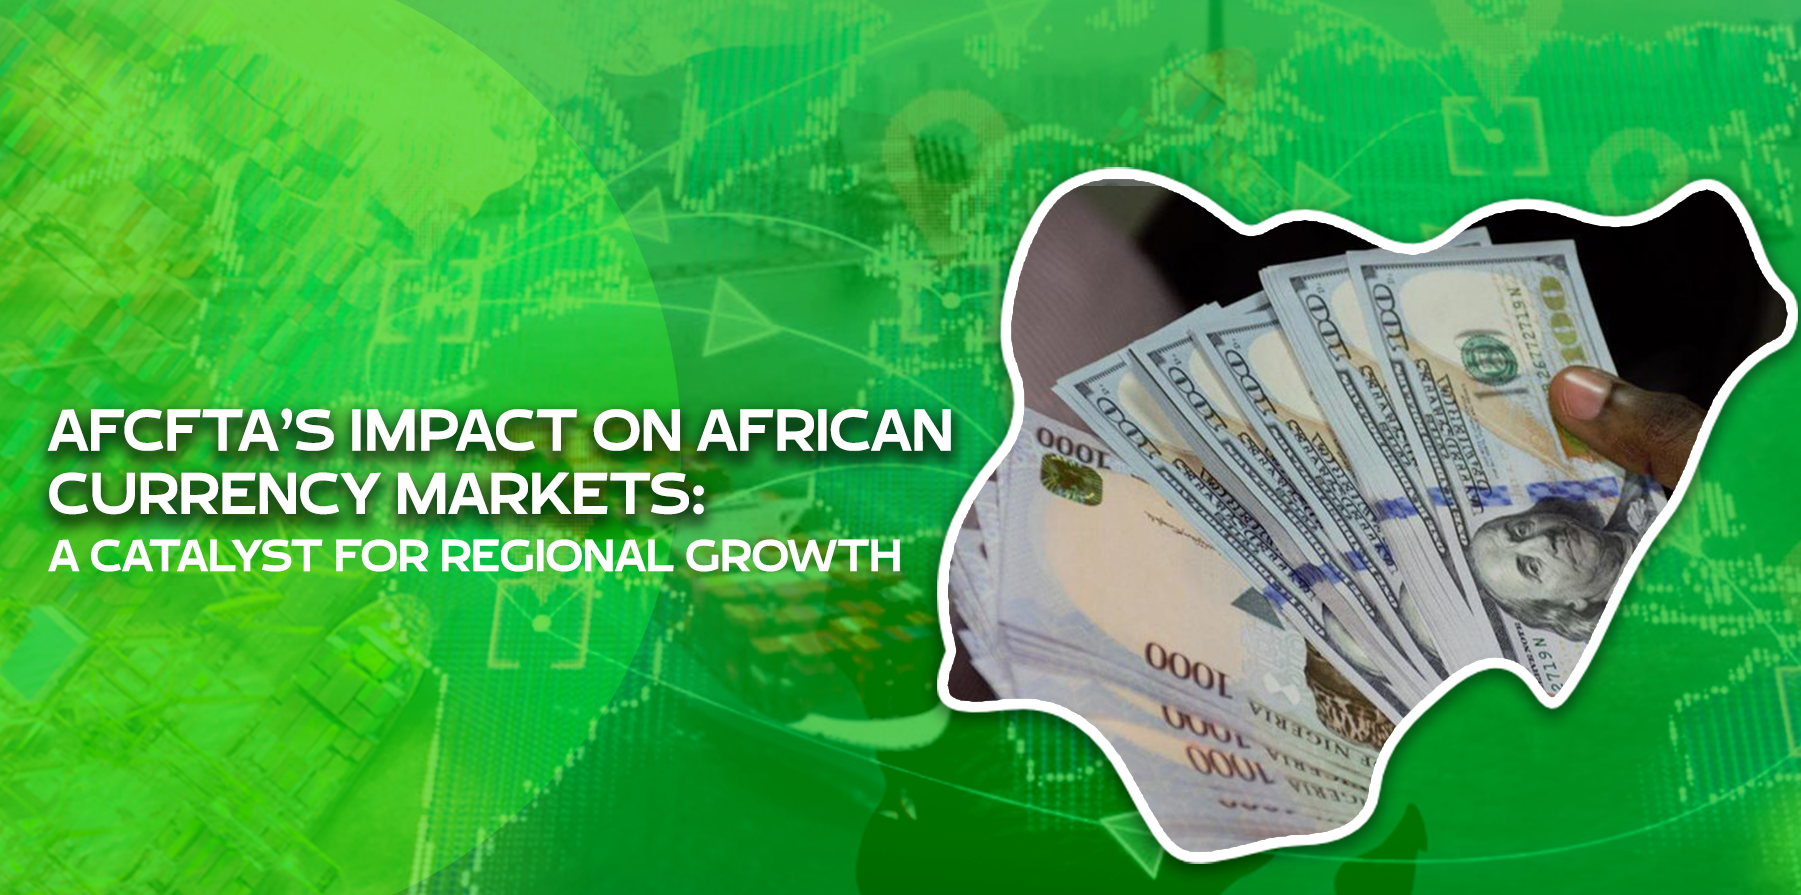 AFCFTA'S IMPACT ON AFRICAN CURRENCY MARKETS